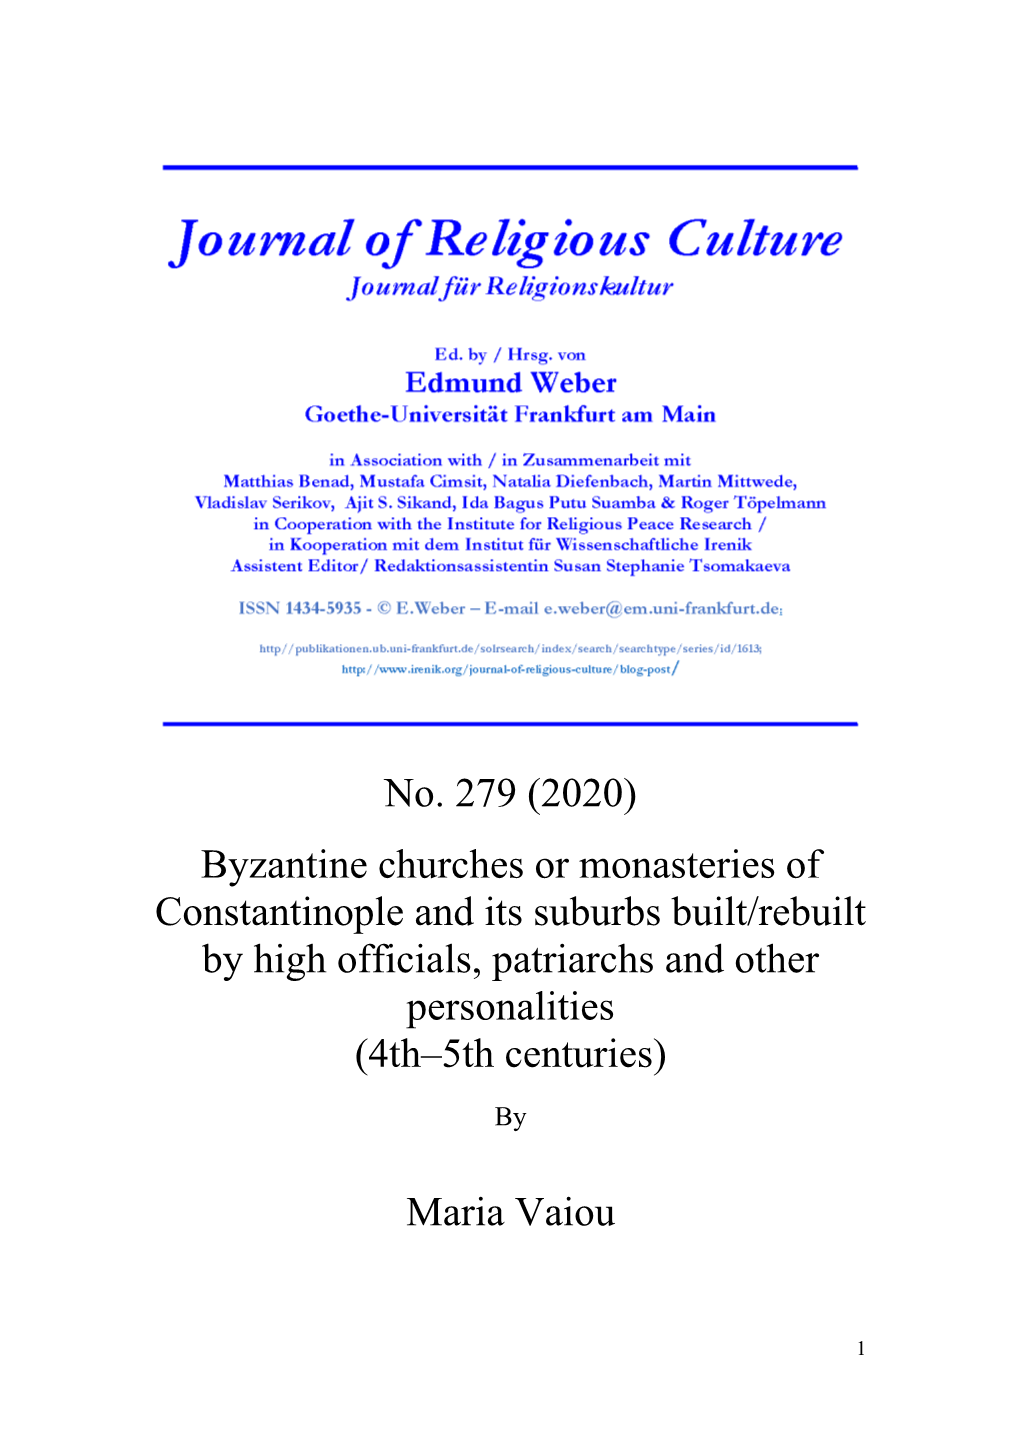 No. 279 (2020) Byzantine Churches Or Monasteries of Constantinople And